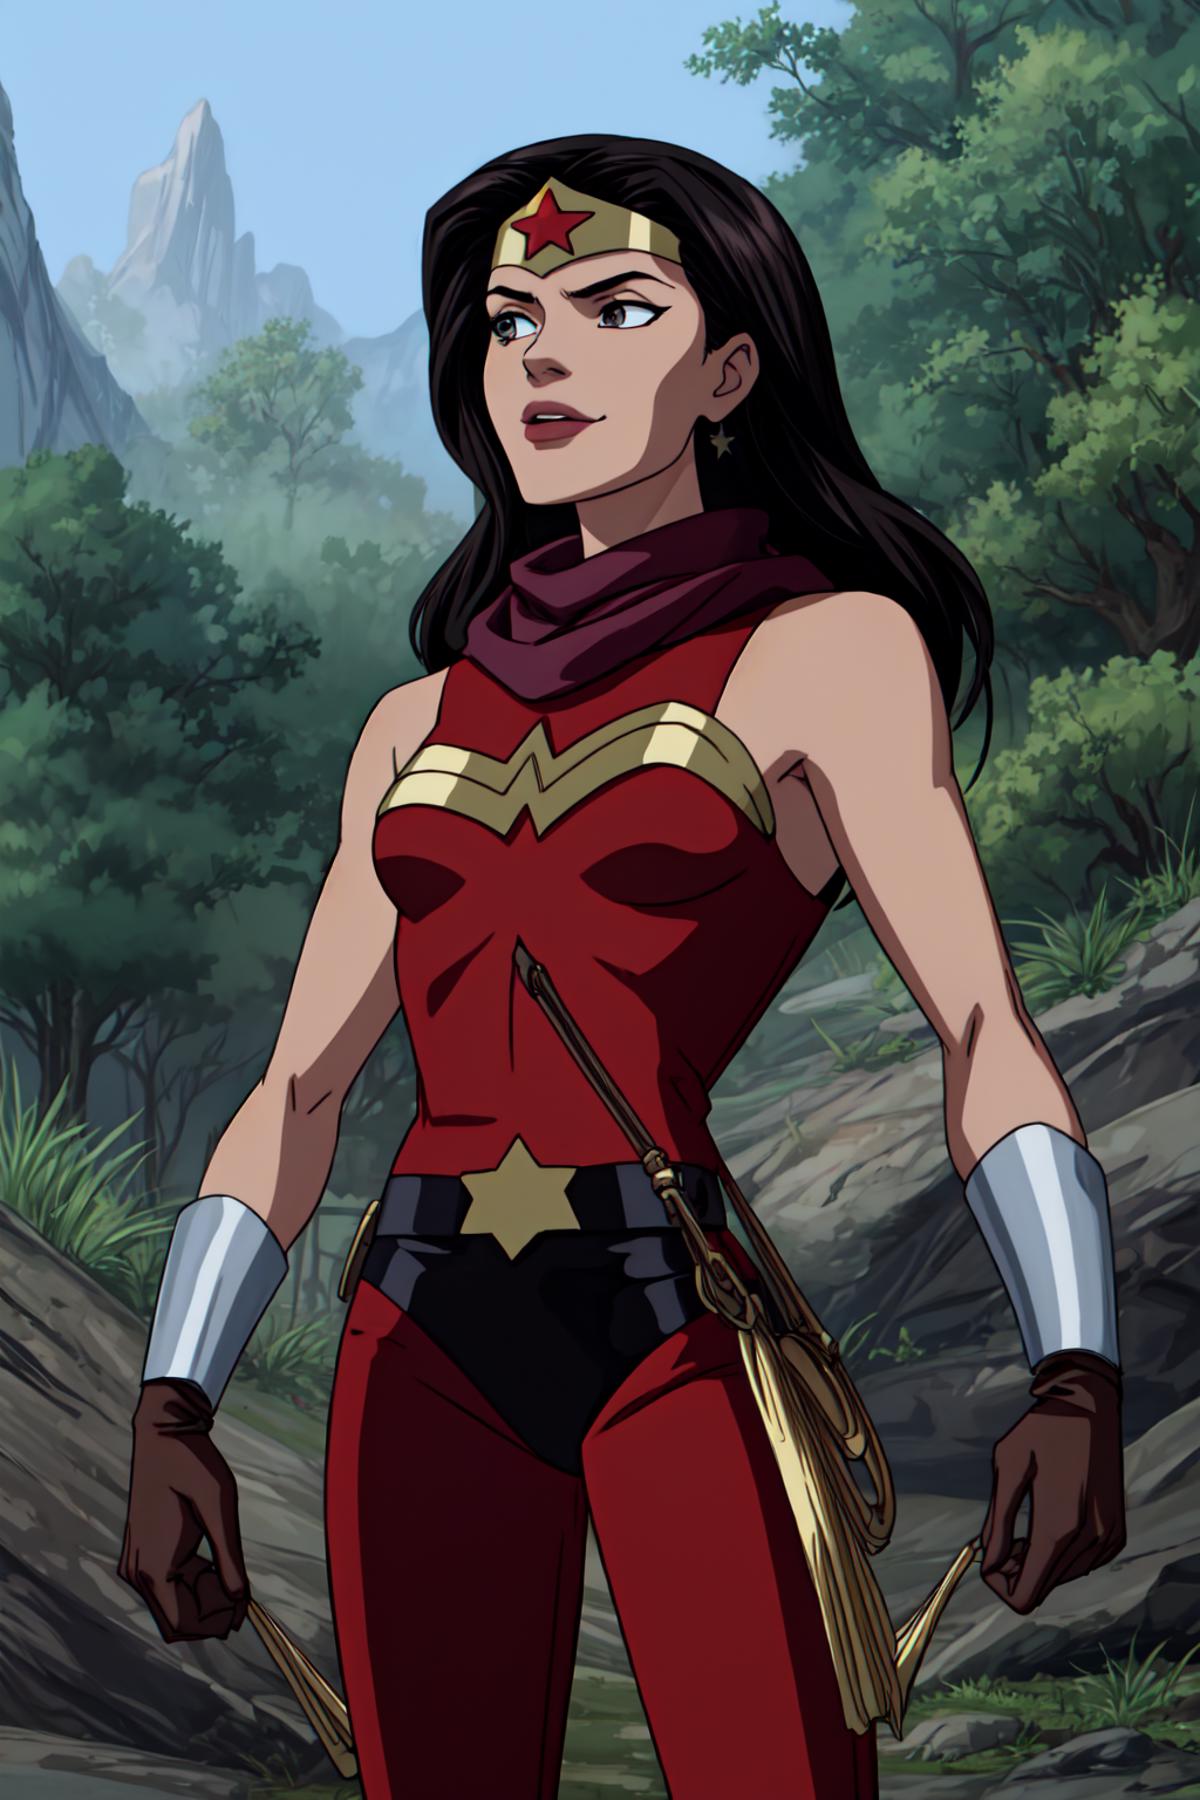 Wonder woman from Justice league animated series (LyCORIS) image by BoomAi